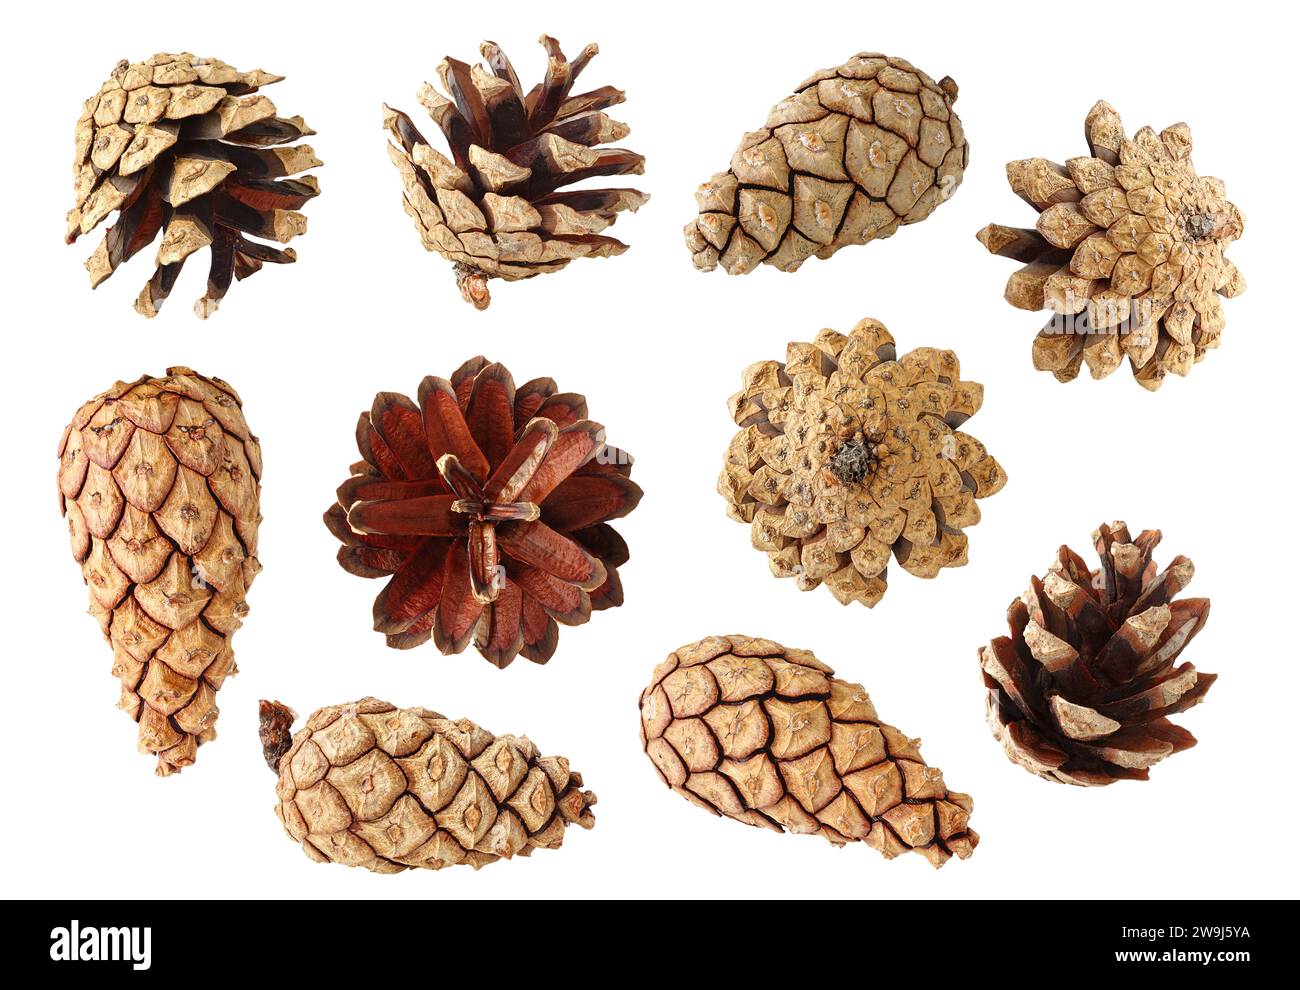 Pine cones collection isolated on white background Stock Photo